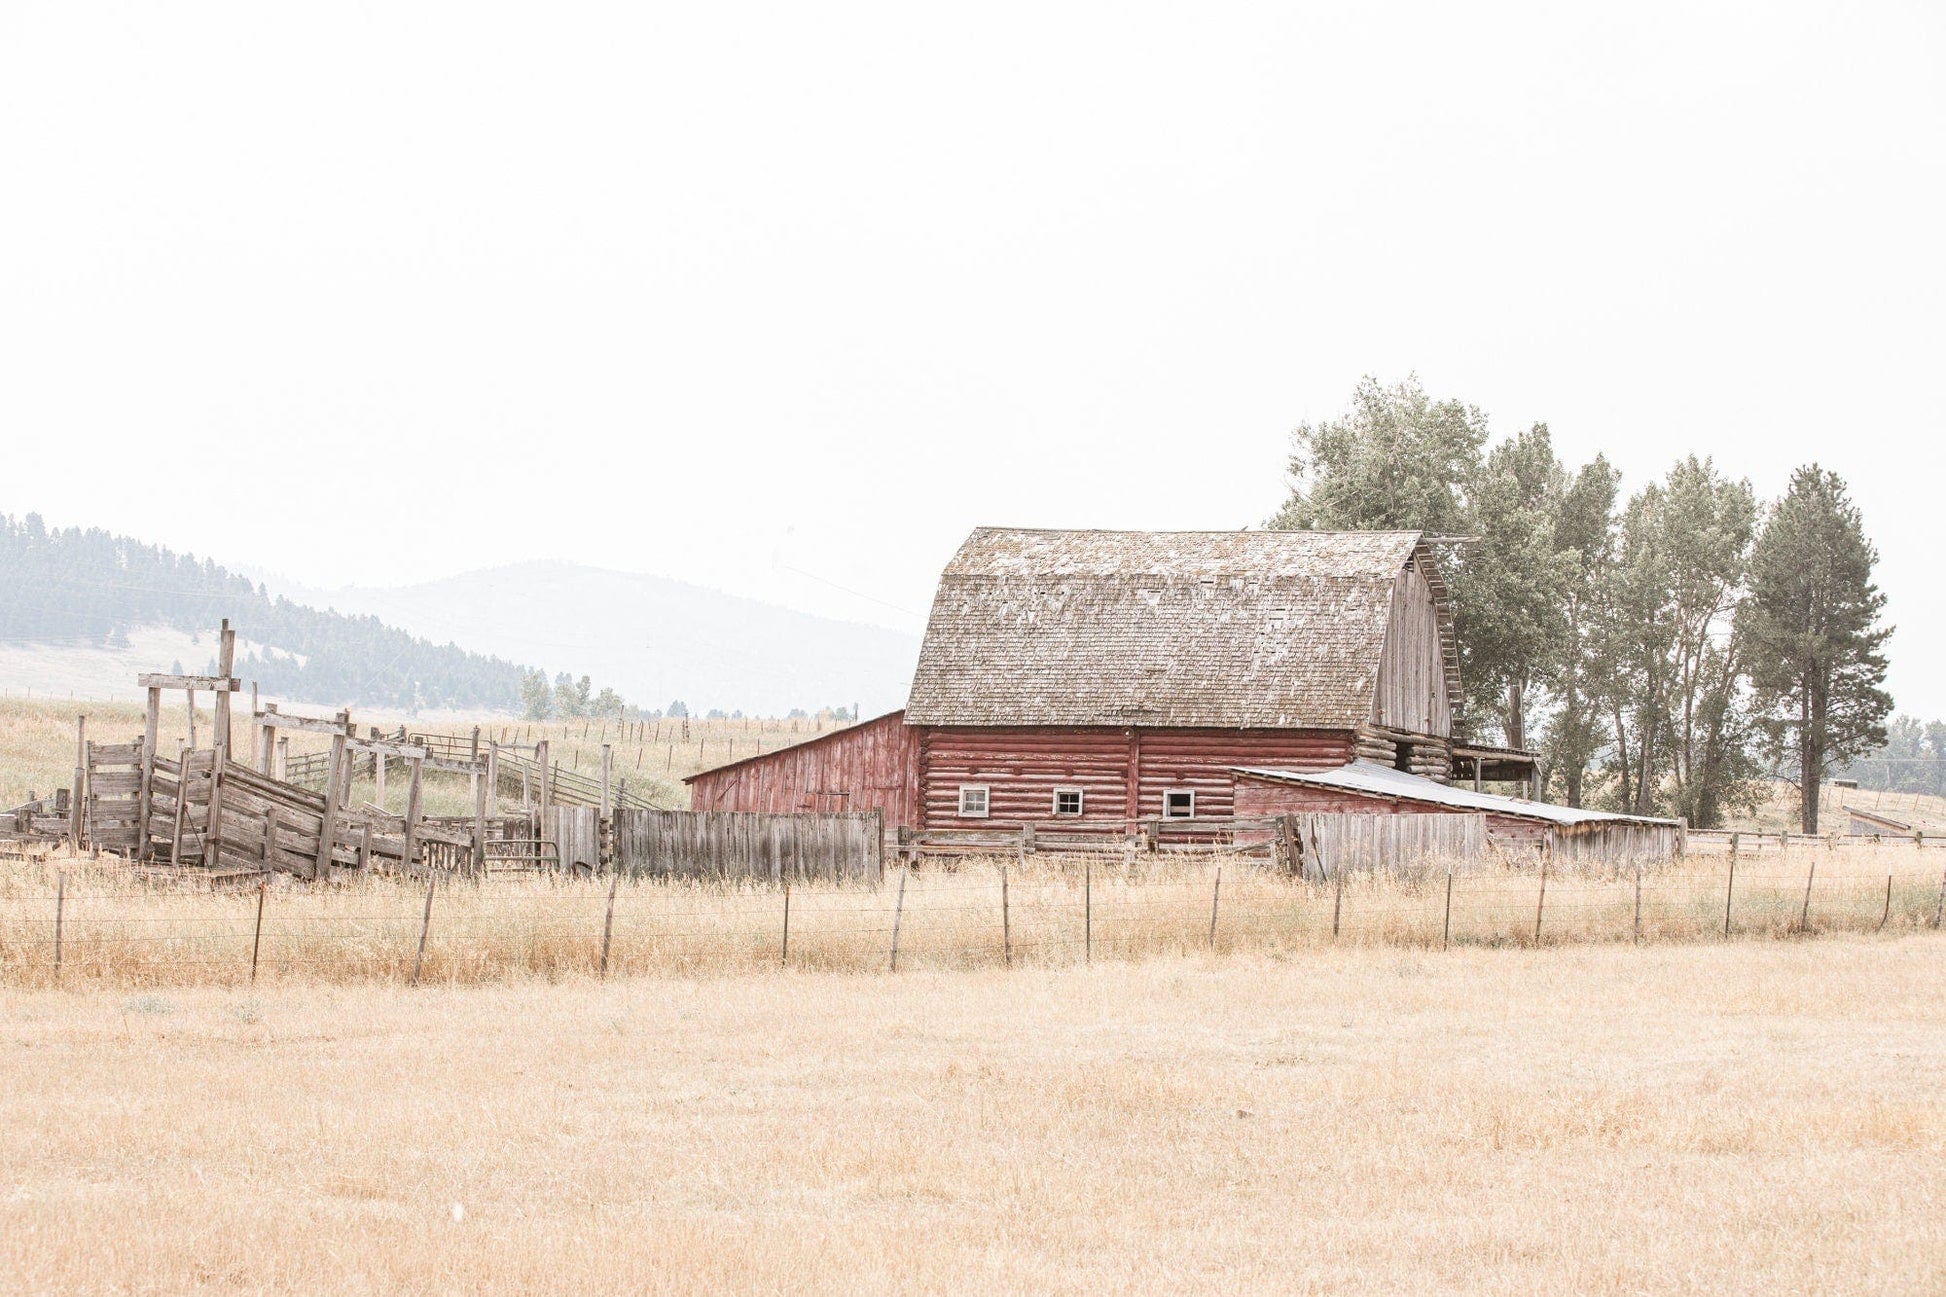 Rustic Old Red Barn and Corral in Farmhouse Colors Paper Photo Print / 12 x 18 Inches Wall Art Teri James Photography